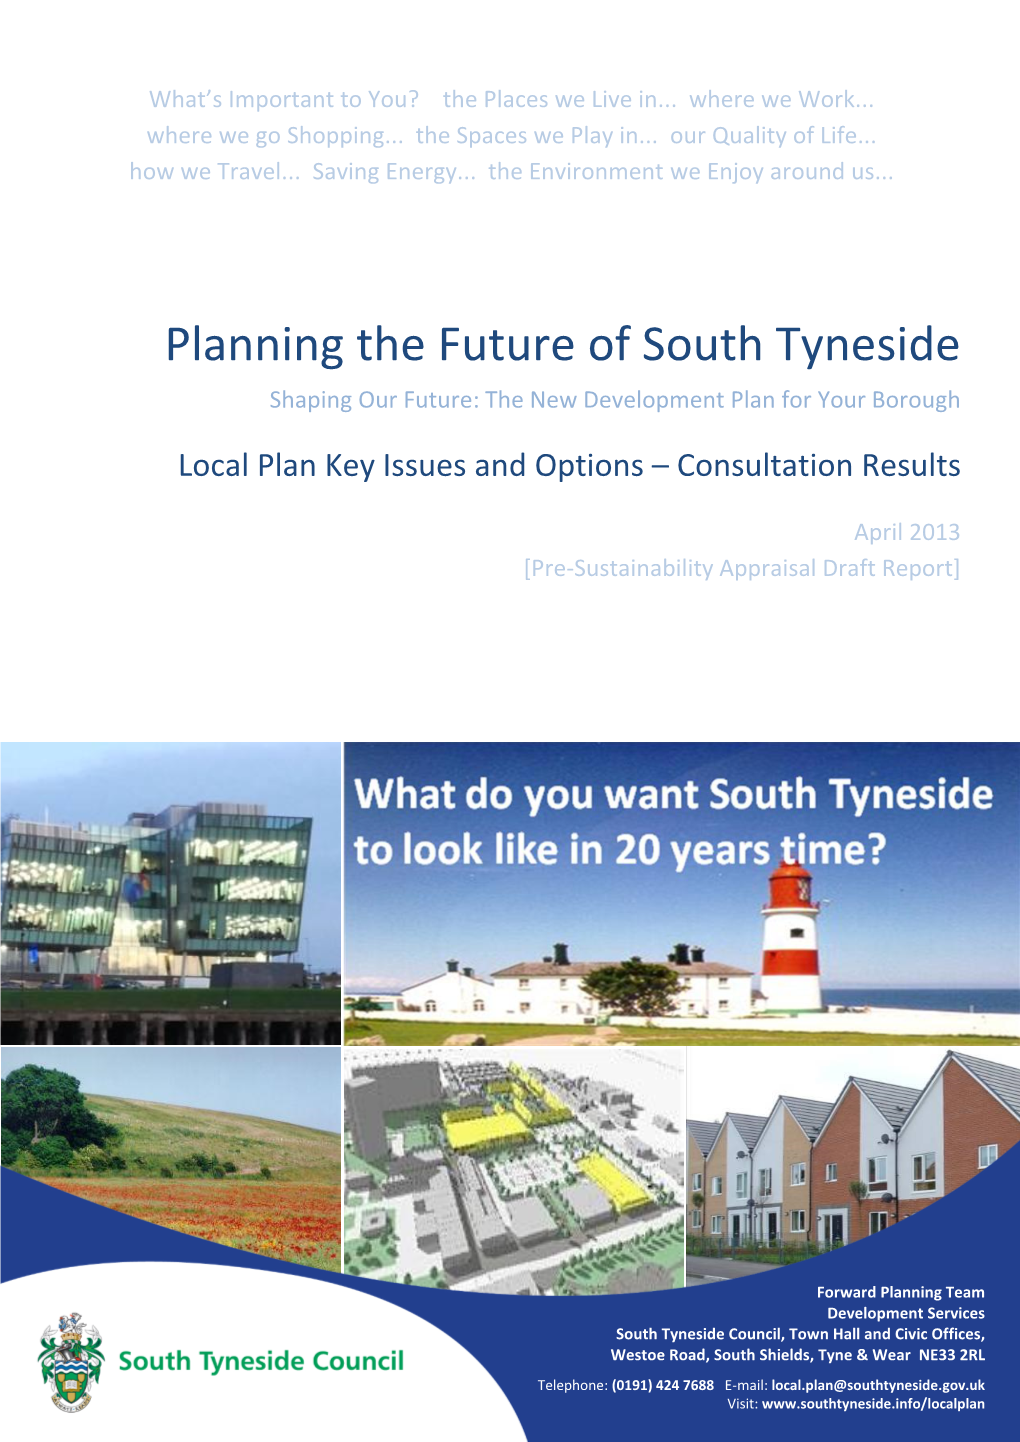 Planning the Future of South Tyneside Shaping Our Future: the New Development Plan for Your Borough